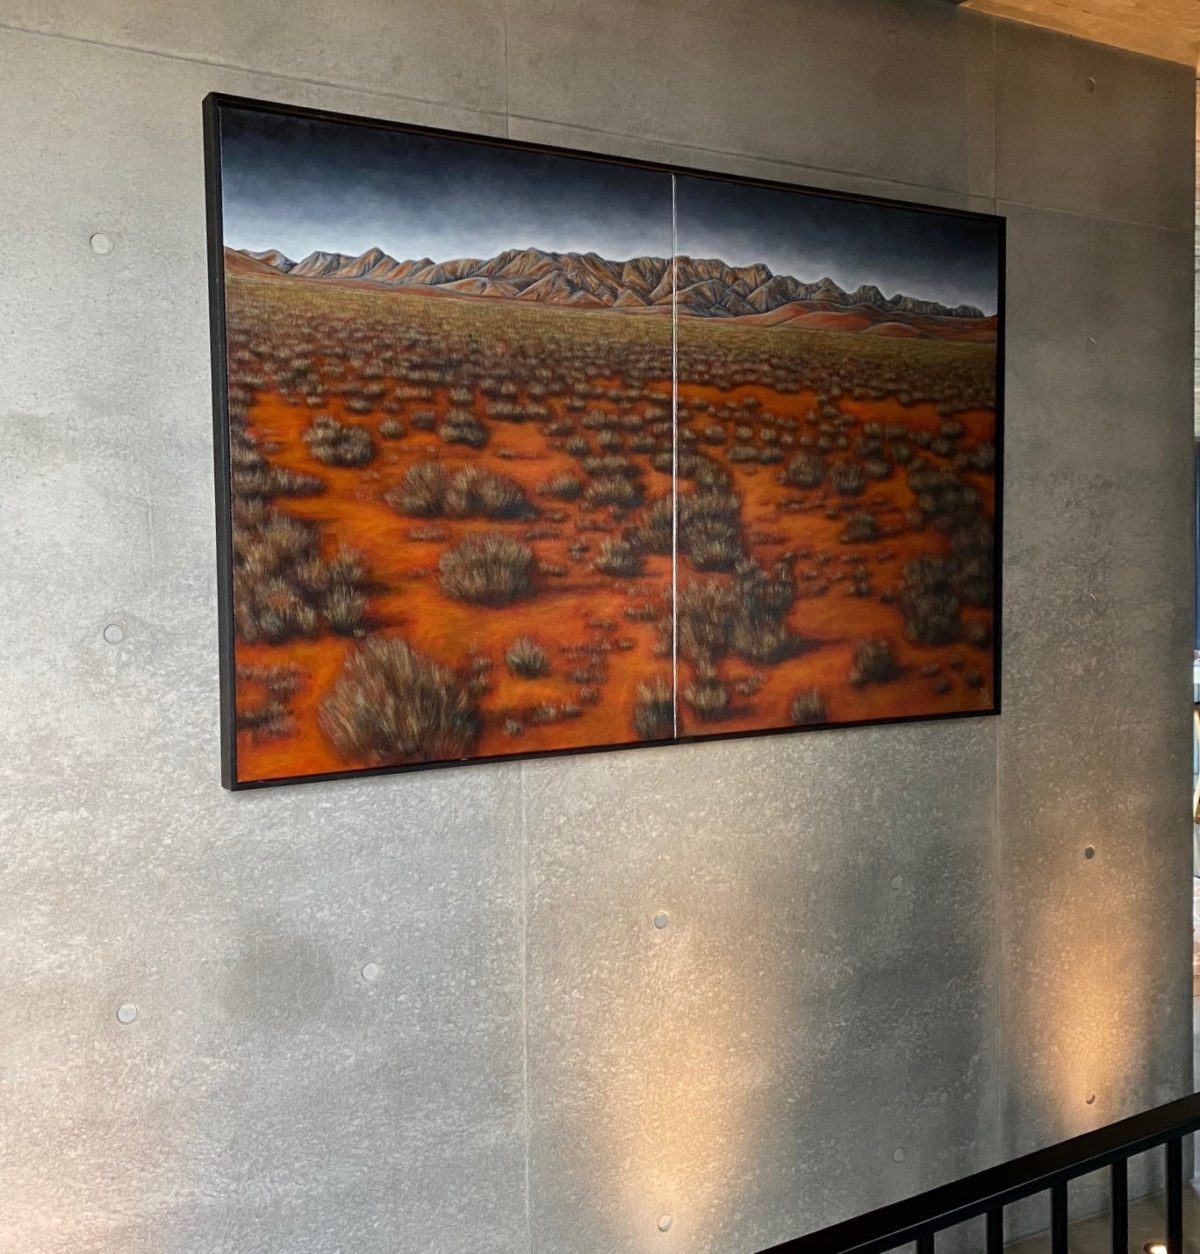 Sydney based provider of civil works and construction enhances office with fine art